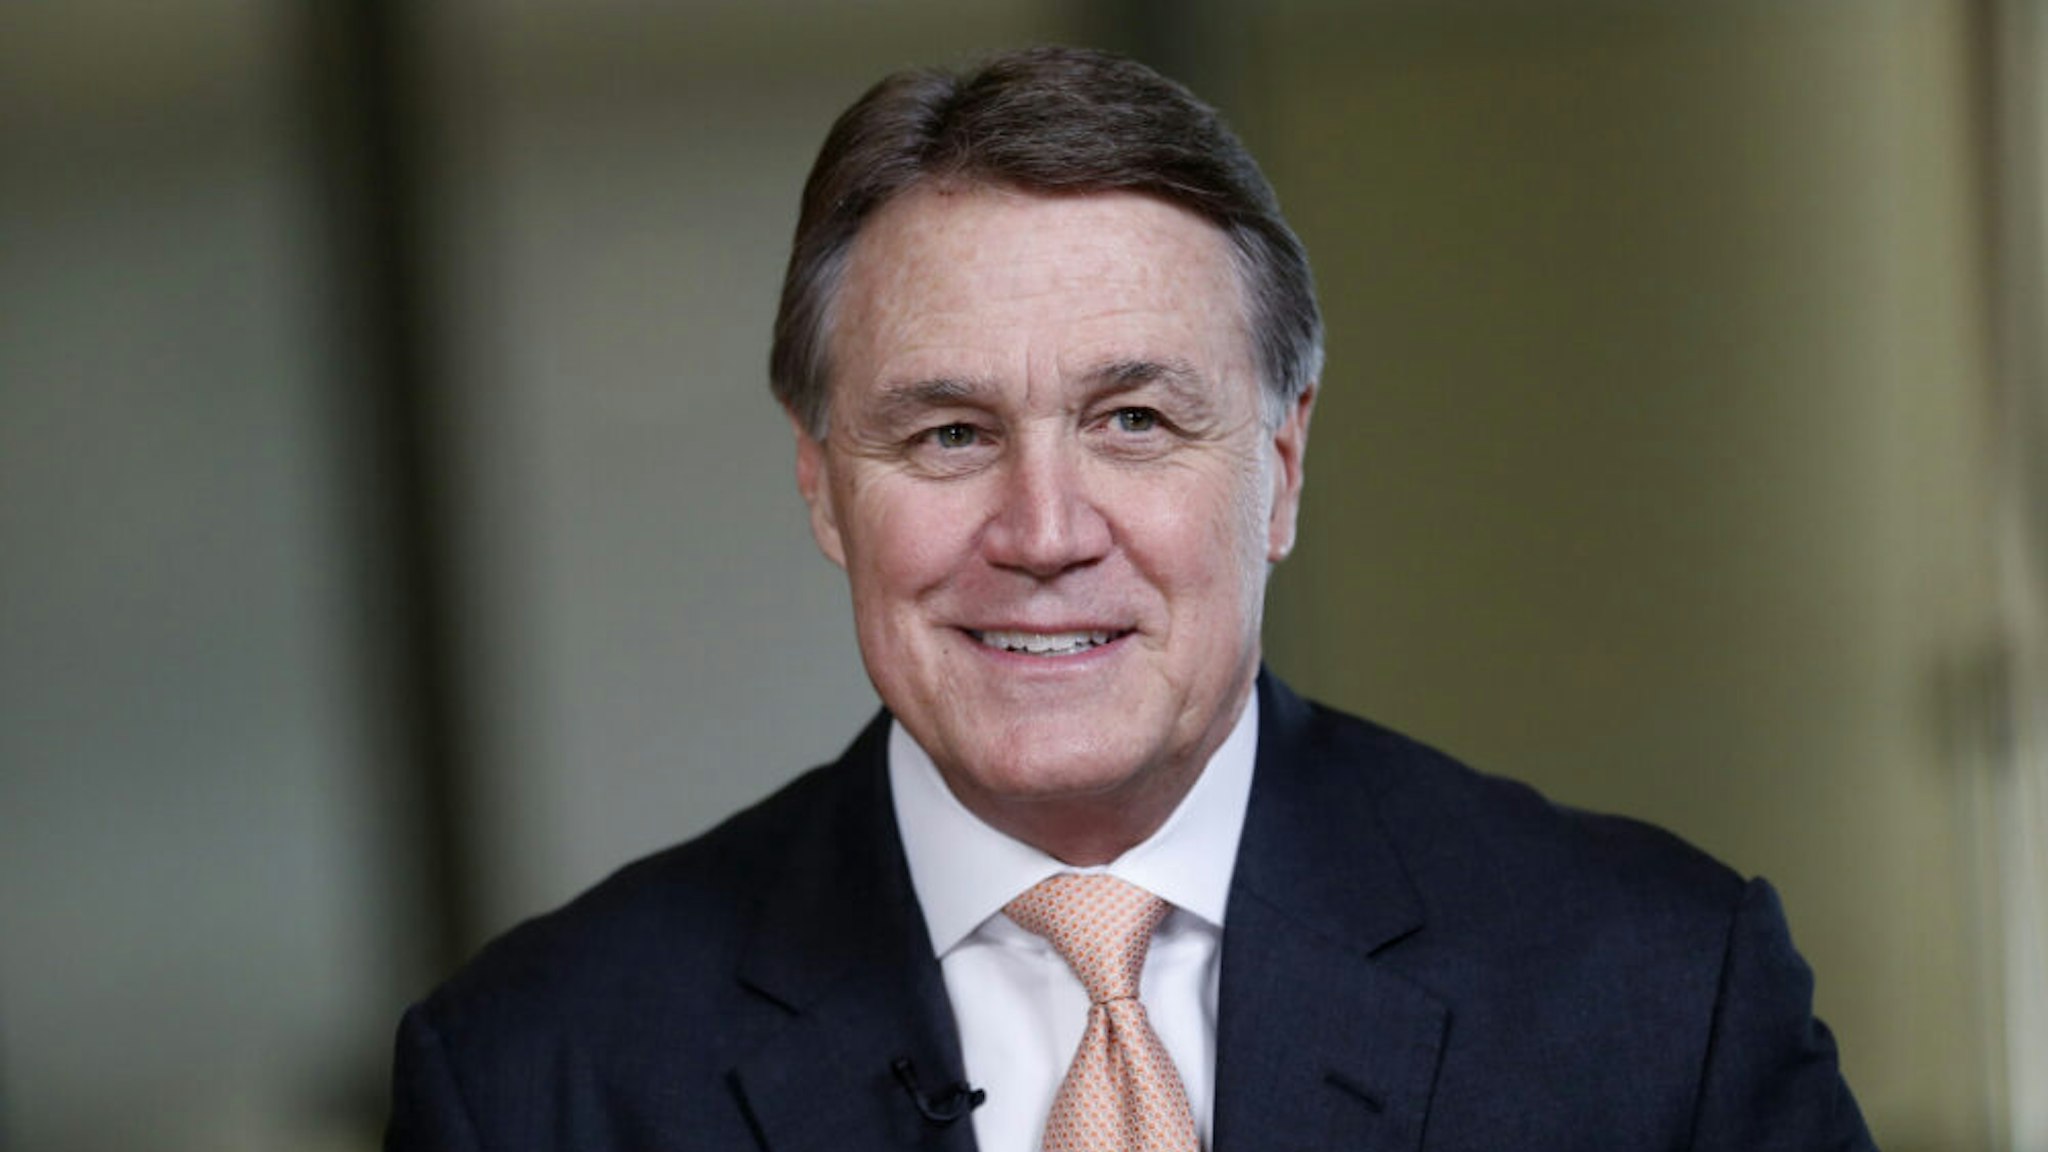 Senator Dave Perdue, a Republican from Georgia, speaks during a Bloomberg Television interview the annual Milken Institute Global Conference in Beverly Hills , California, U.S., on Monday, May 2, 2016. The conference gathers attendees to explore solutions to today's most pressing challenges in financial markets, industry sectors, health, government and education.